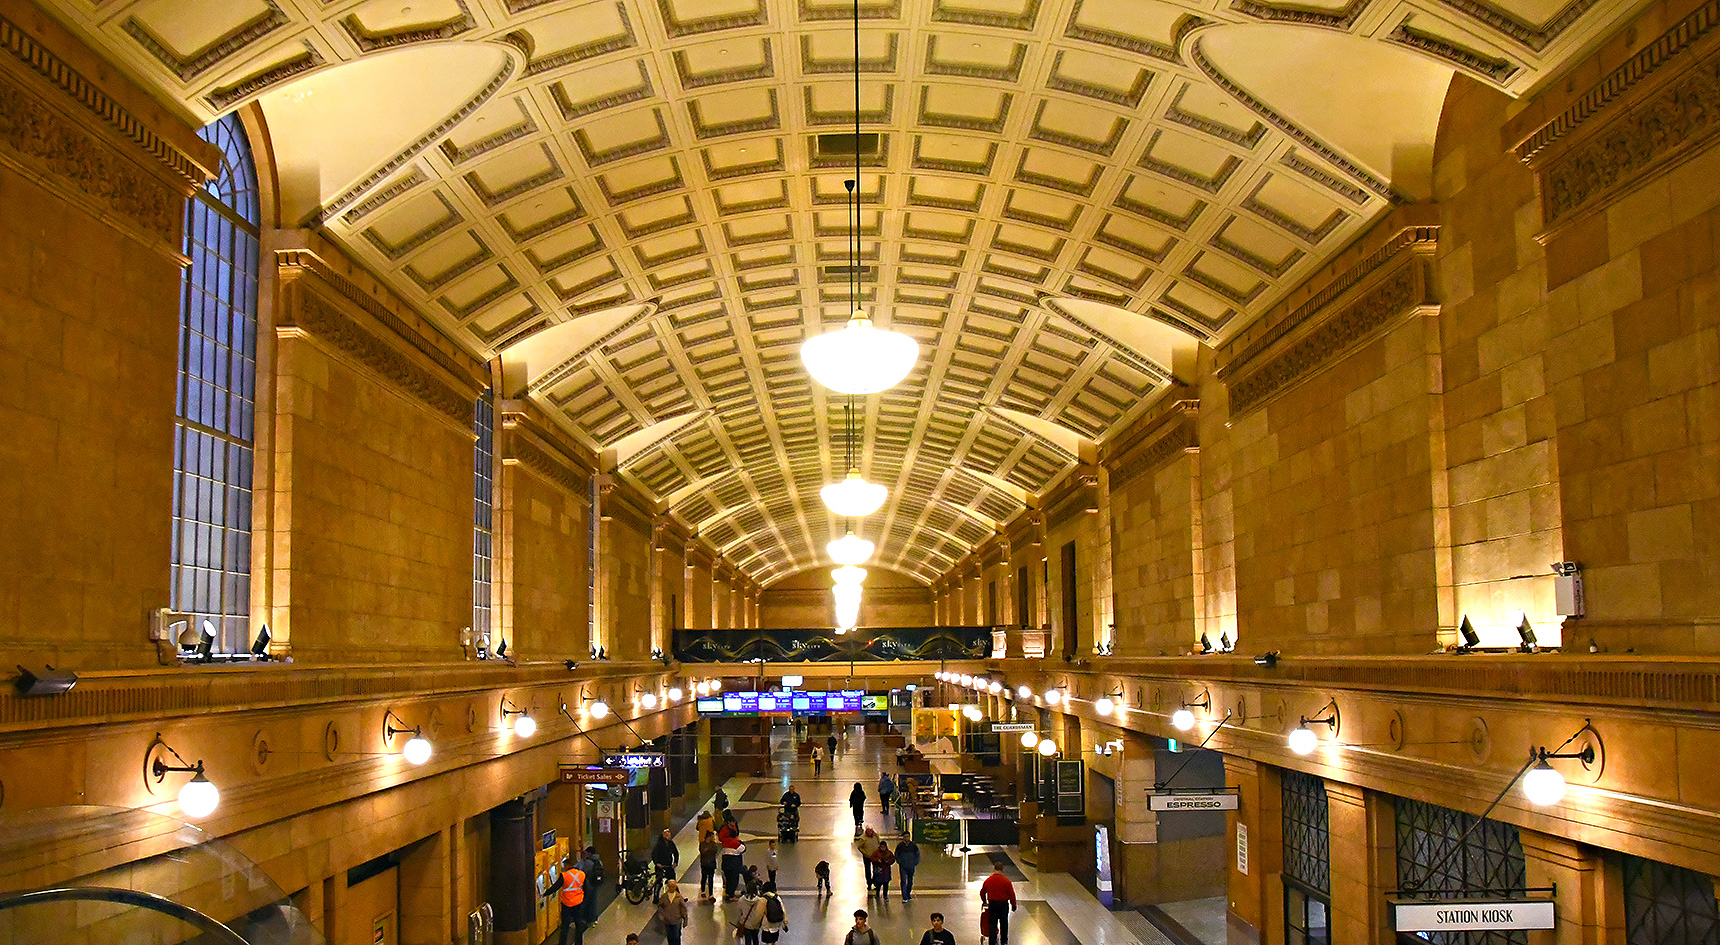 Architecture of the Adelaide Railway Station